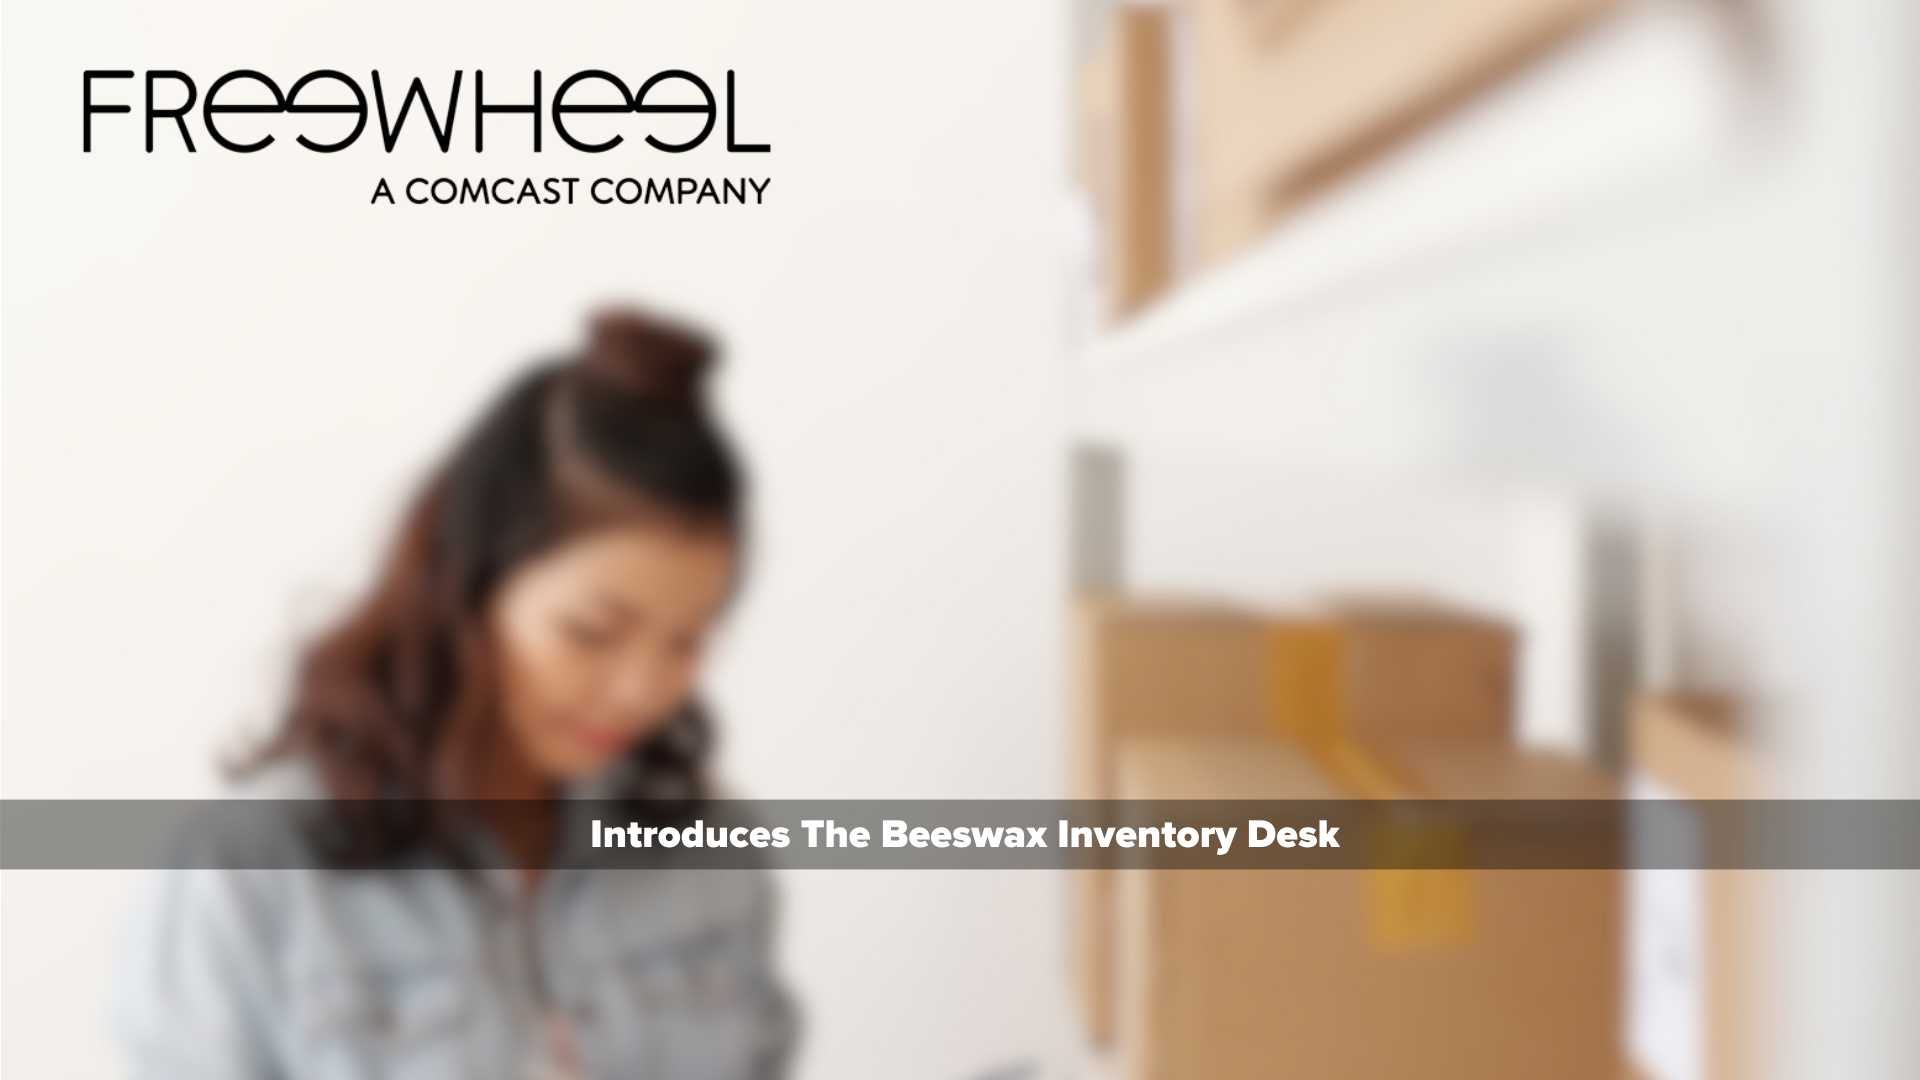 FreeWheel Introduces The Beeswax Inventory Desk